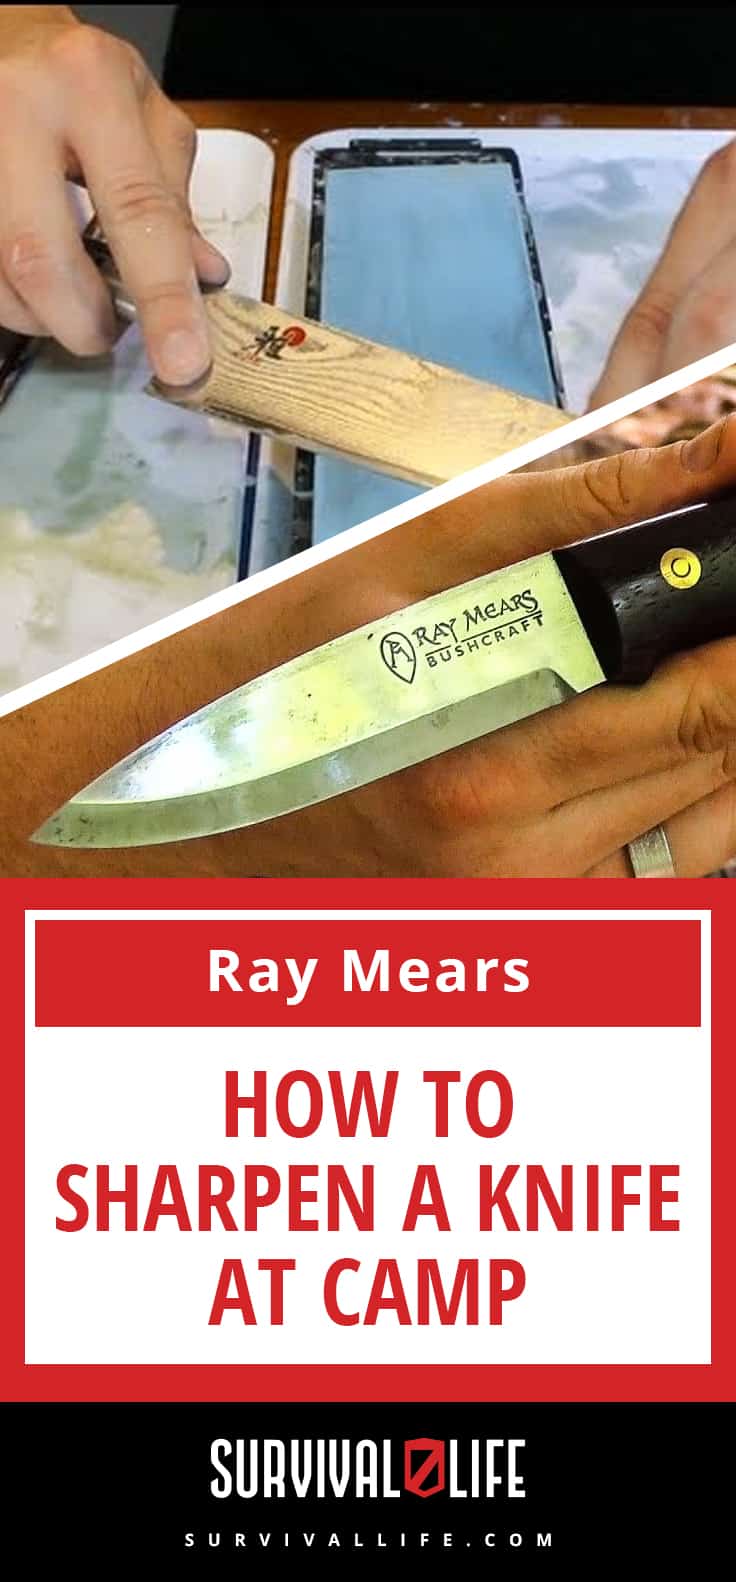 How To Sharpen A Knife At Camp [Video] | https://survivallife.com/ray-mears-how-to-sharpen-a-knife-at-camp/